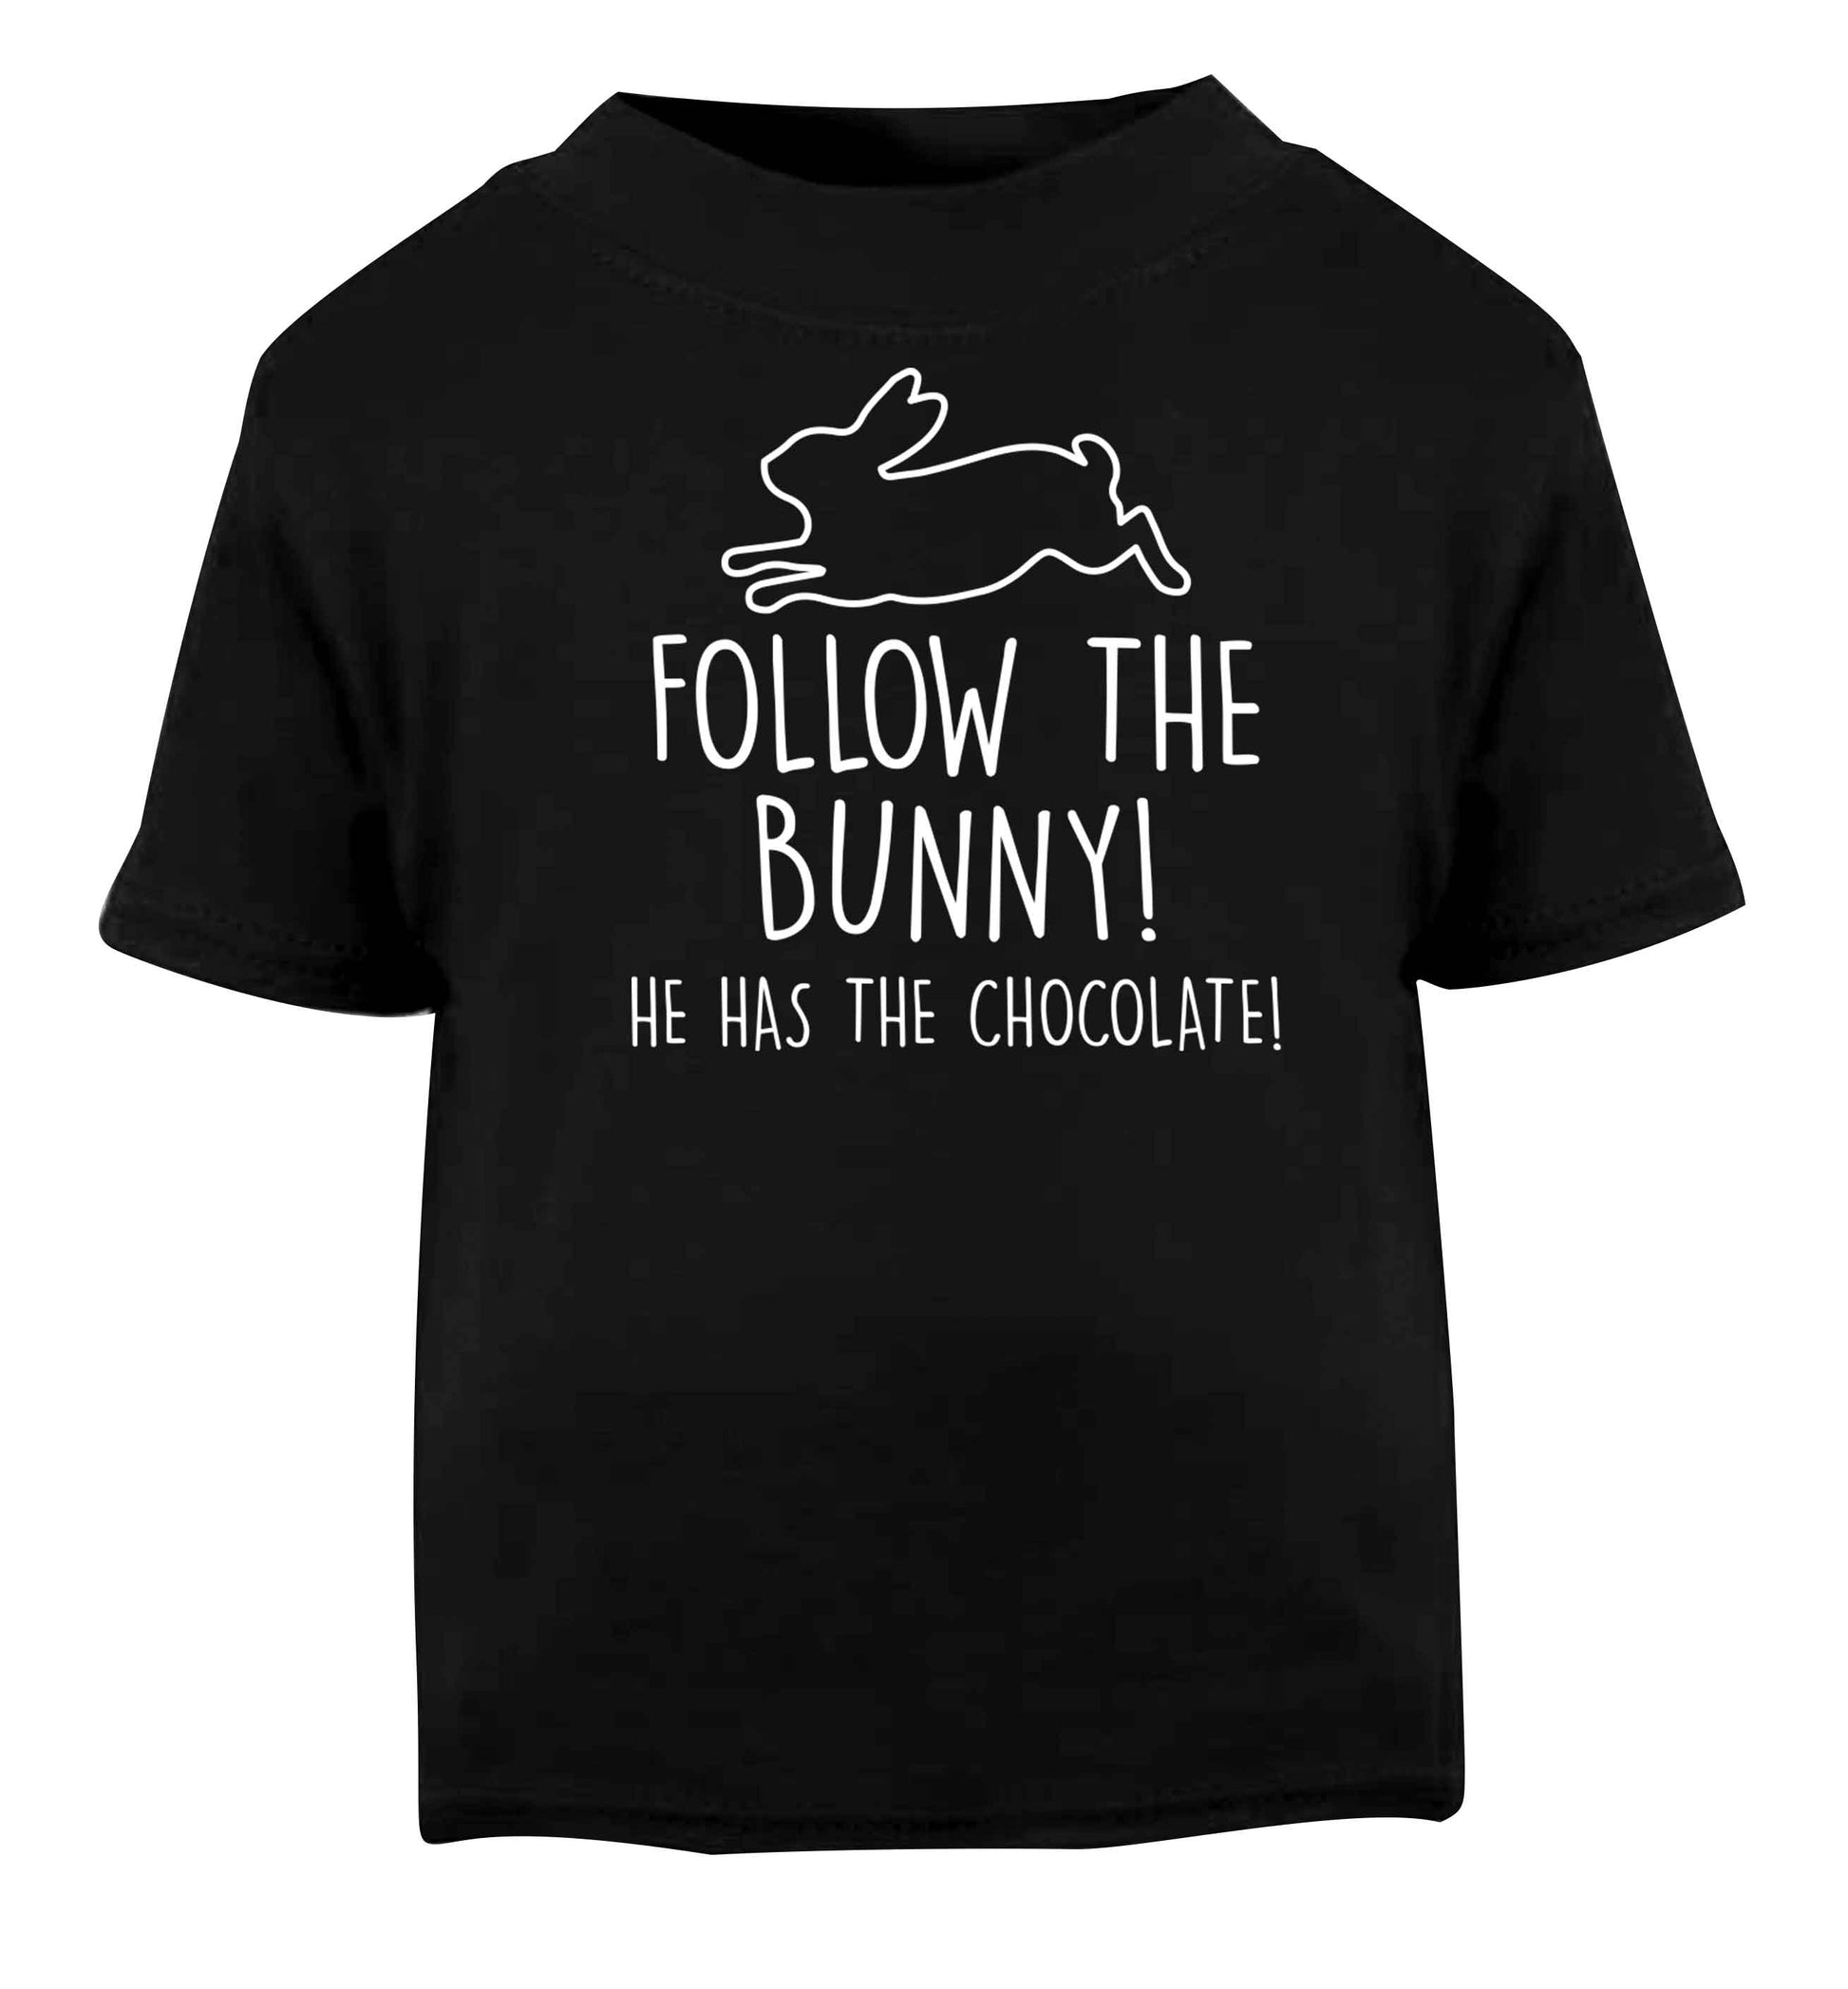 Follow the bunny! He has the chocolate Black baby toddler Tshirt 2 years